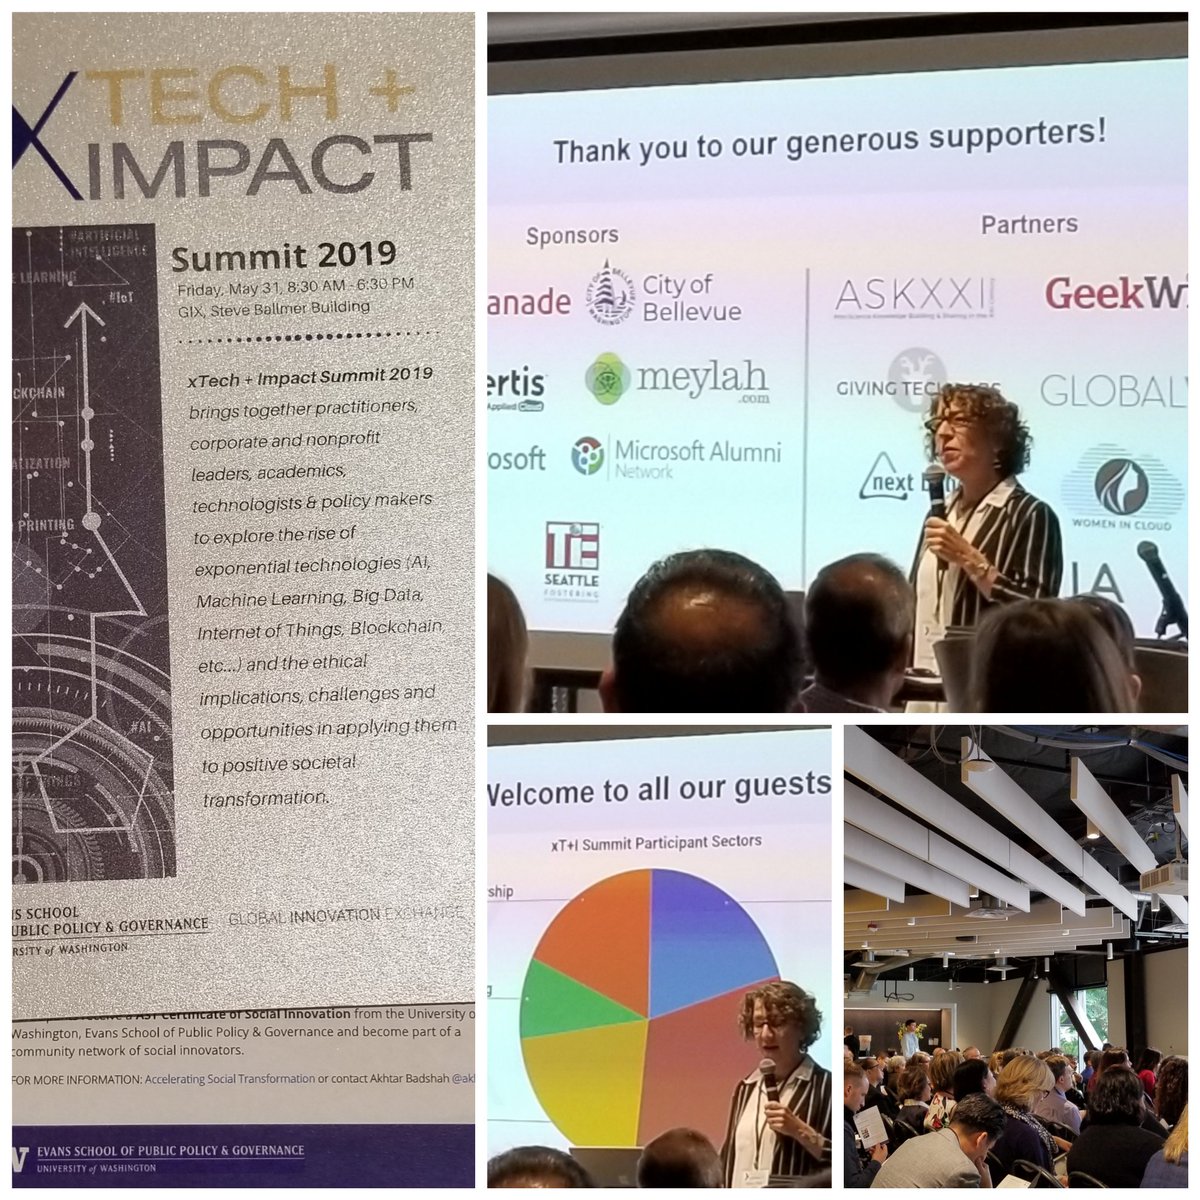 xTech + Impact Summit 2019  kick off by Prof. @MaryKayGugerty. It promises to be an insightful exchange on the rise of #exponentialtechnologies, ethical implications, challenges,  opportunities in positive #socialtransformation  #xTechImpact @evansschool @GIX_edu @geekwire